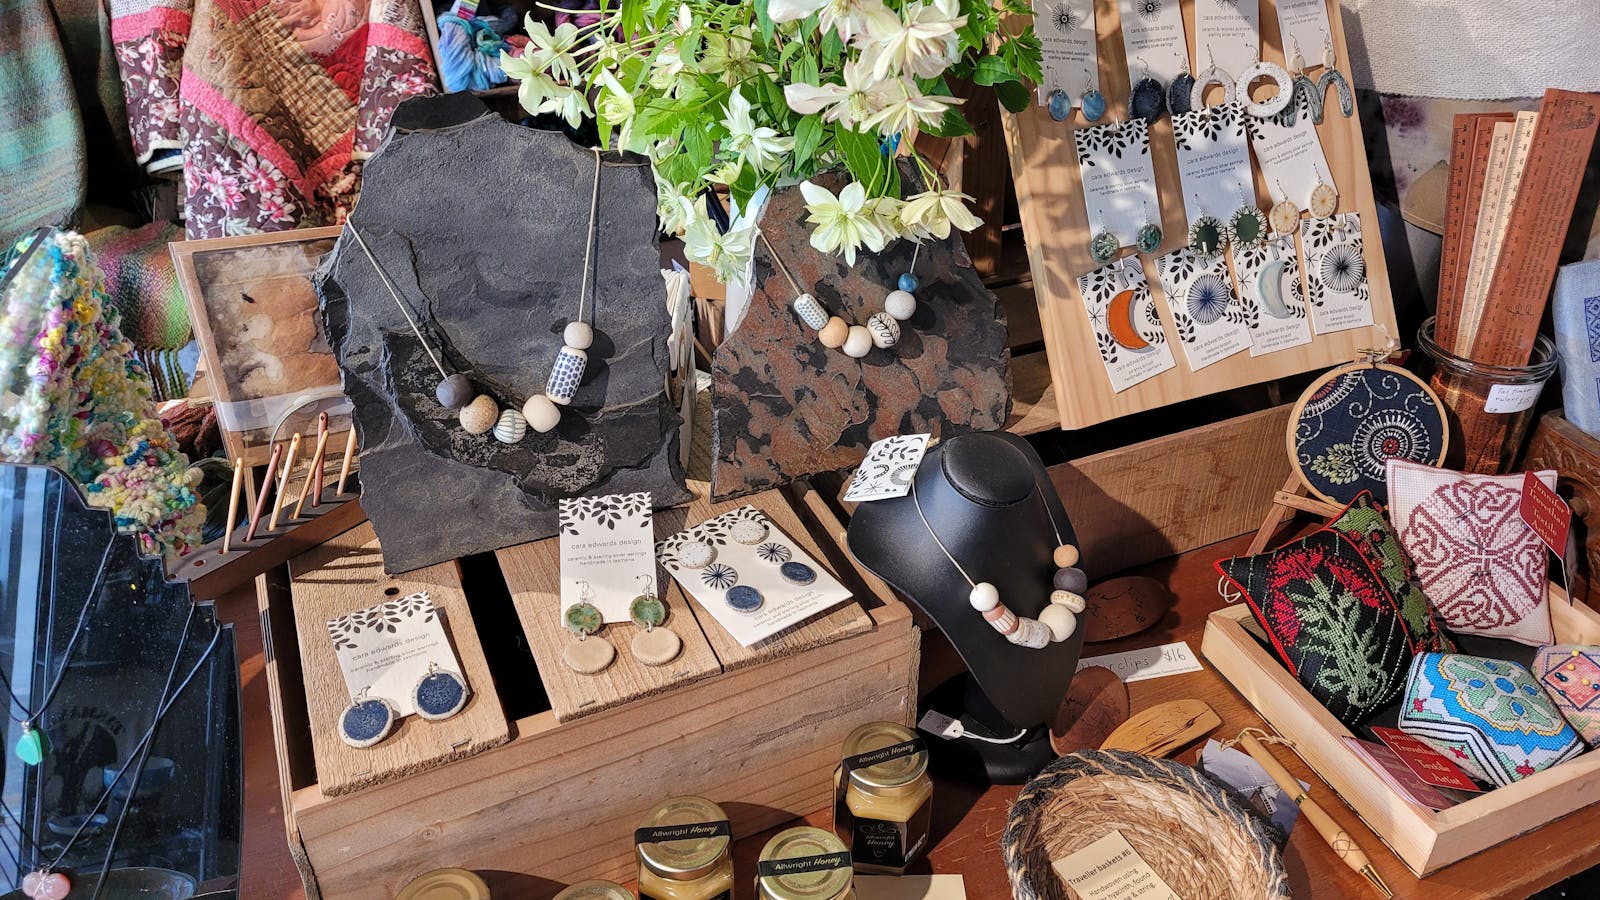 Local honey, jewellery and handcrafted items will delight as you explore the studio.